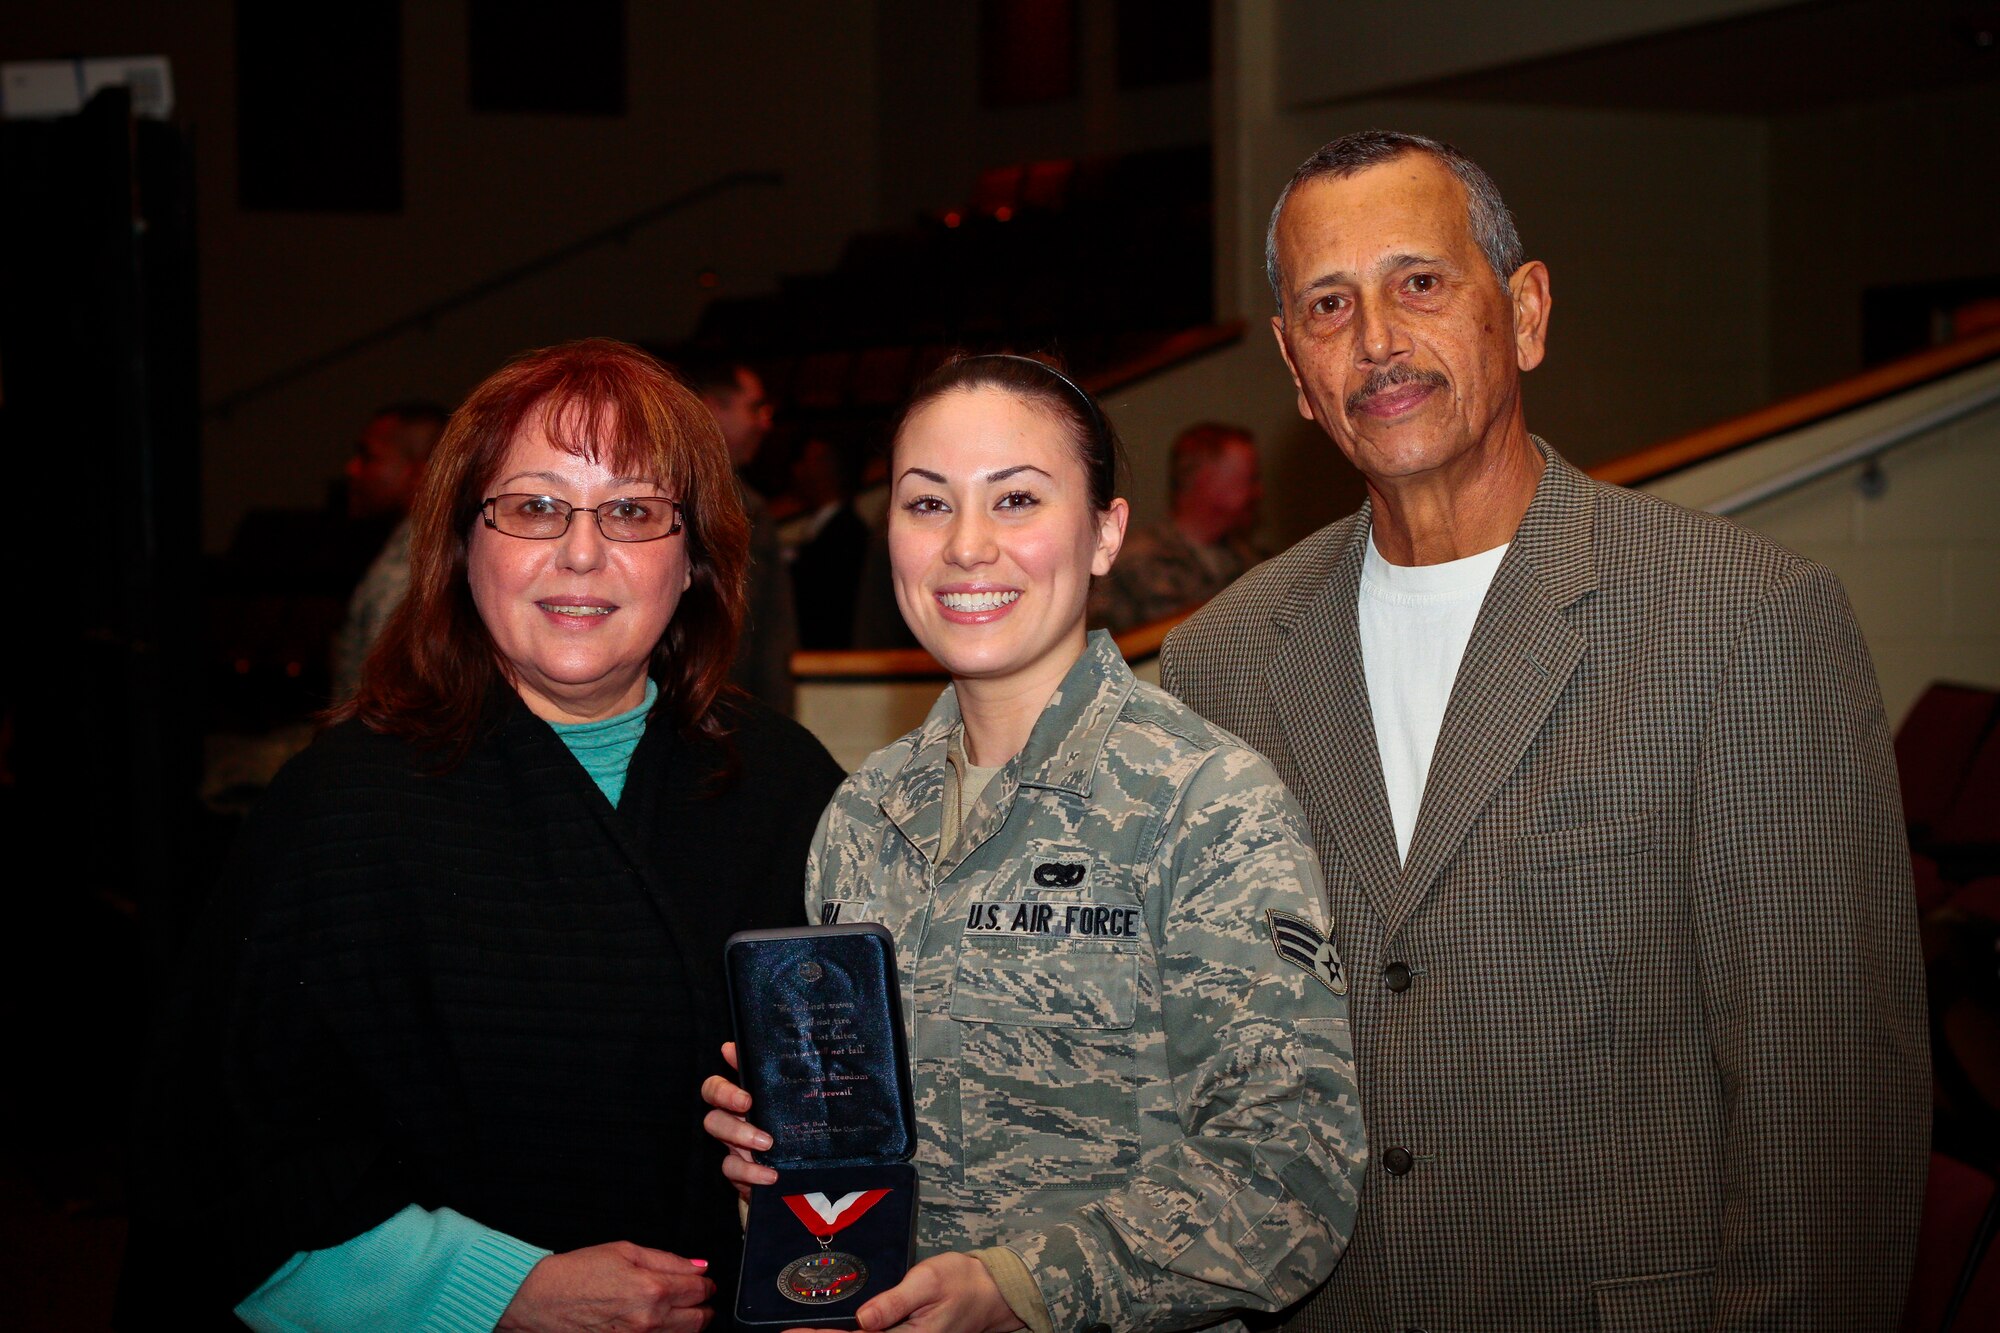 A picture of U.S. Air Force Senior Airman Monica Rivera presenting her mother Diana with a "center of influence" award.